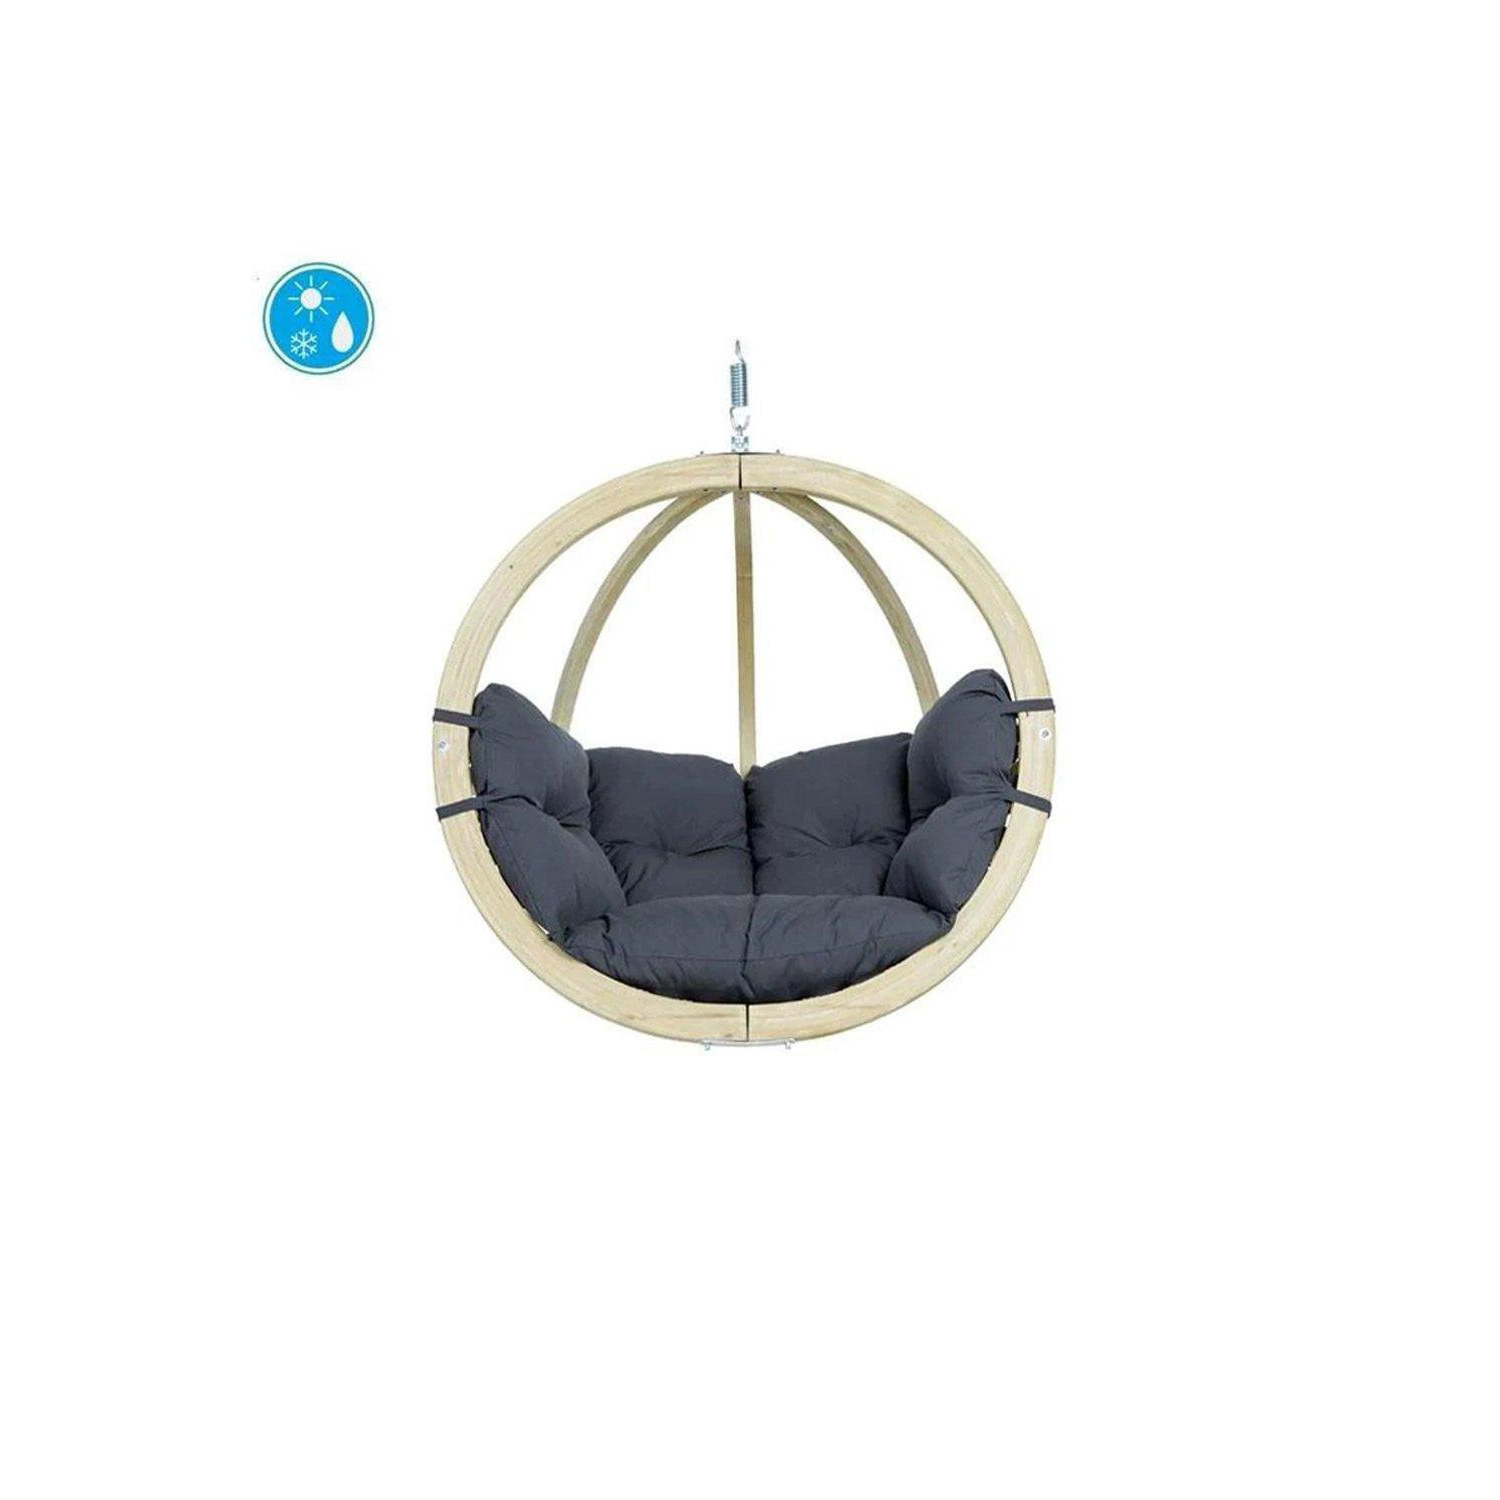 Globo Single Wooden Cushion Egg Hanging Chair - Anthracite - image 1